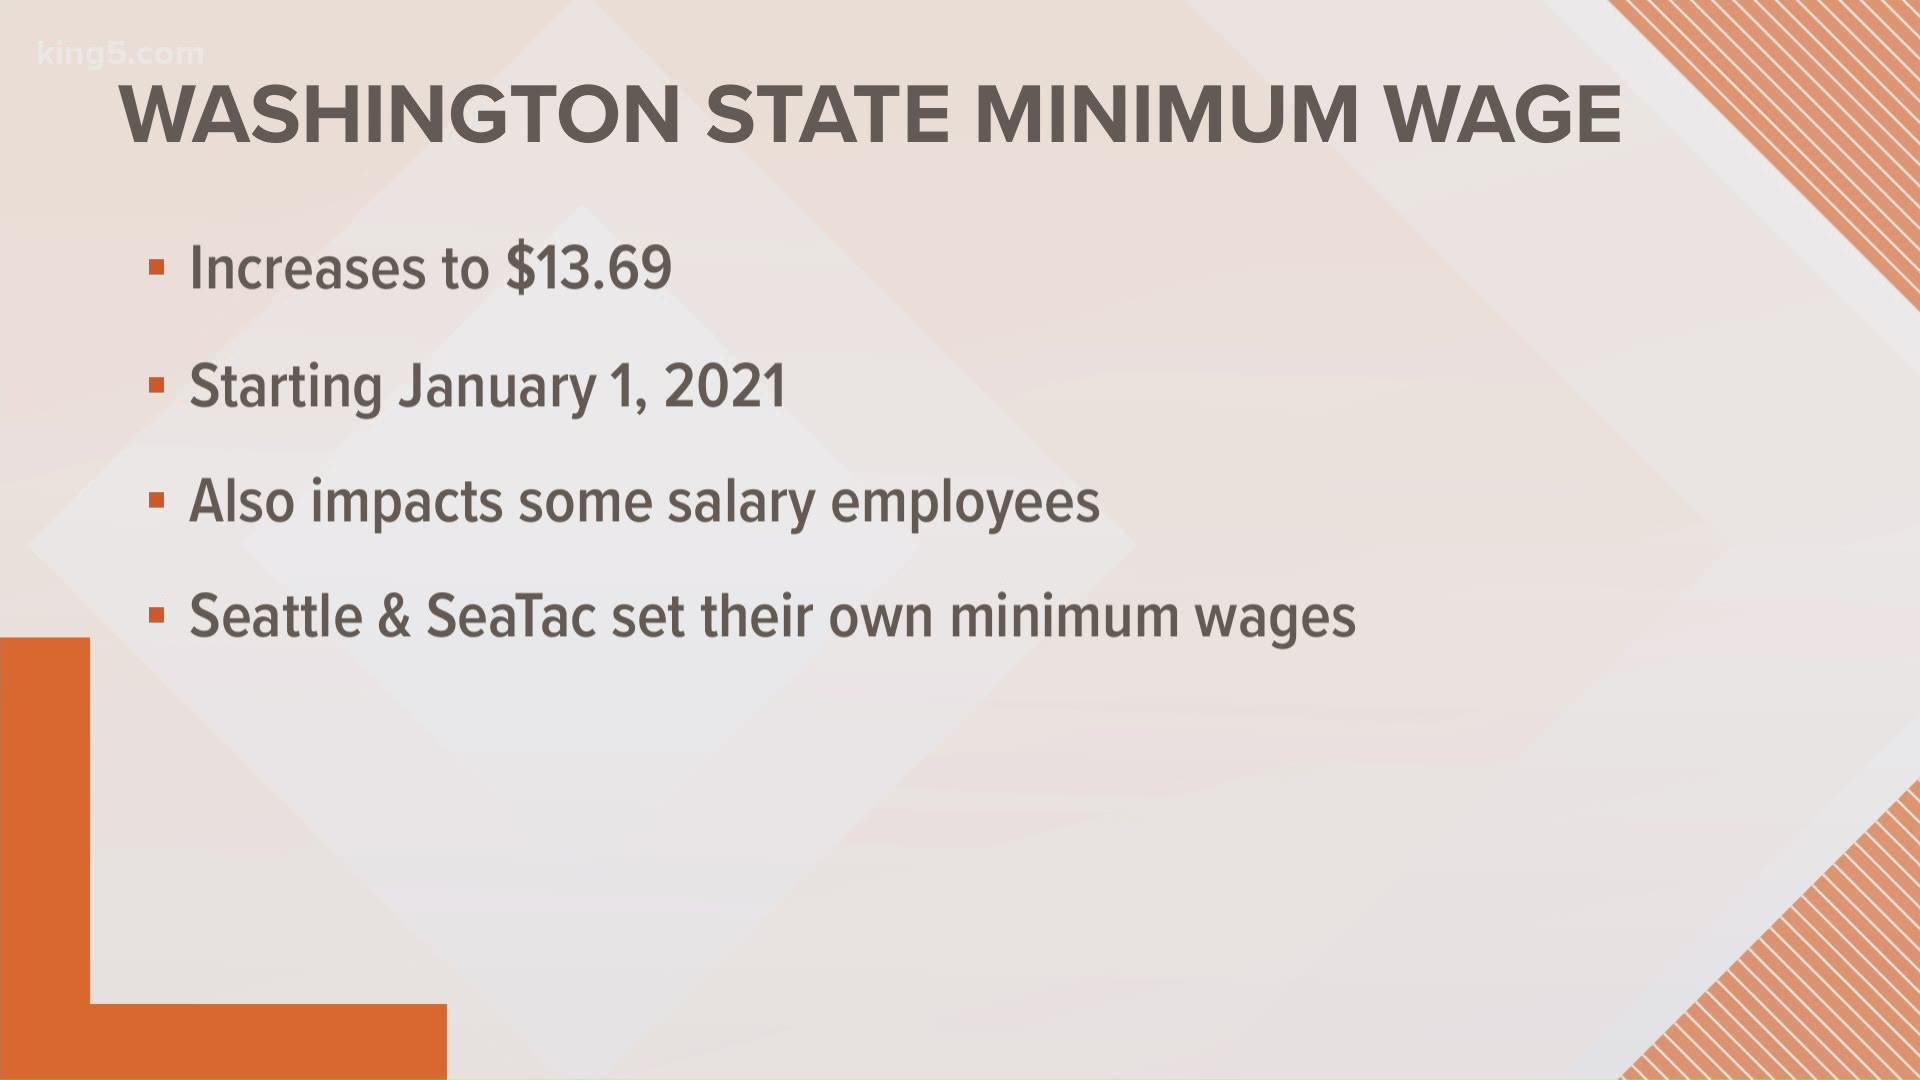 Washington's minimum wage increases to 13.69 in 2021 due to inflation